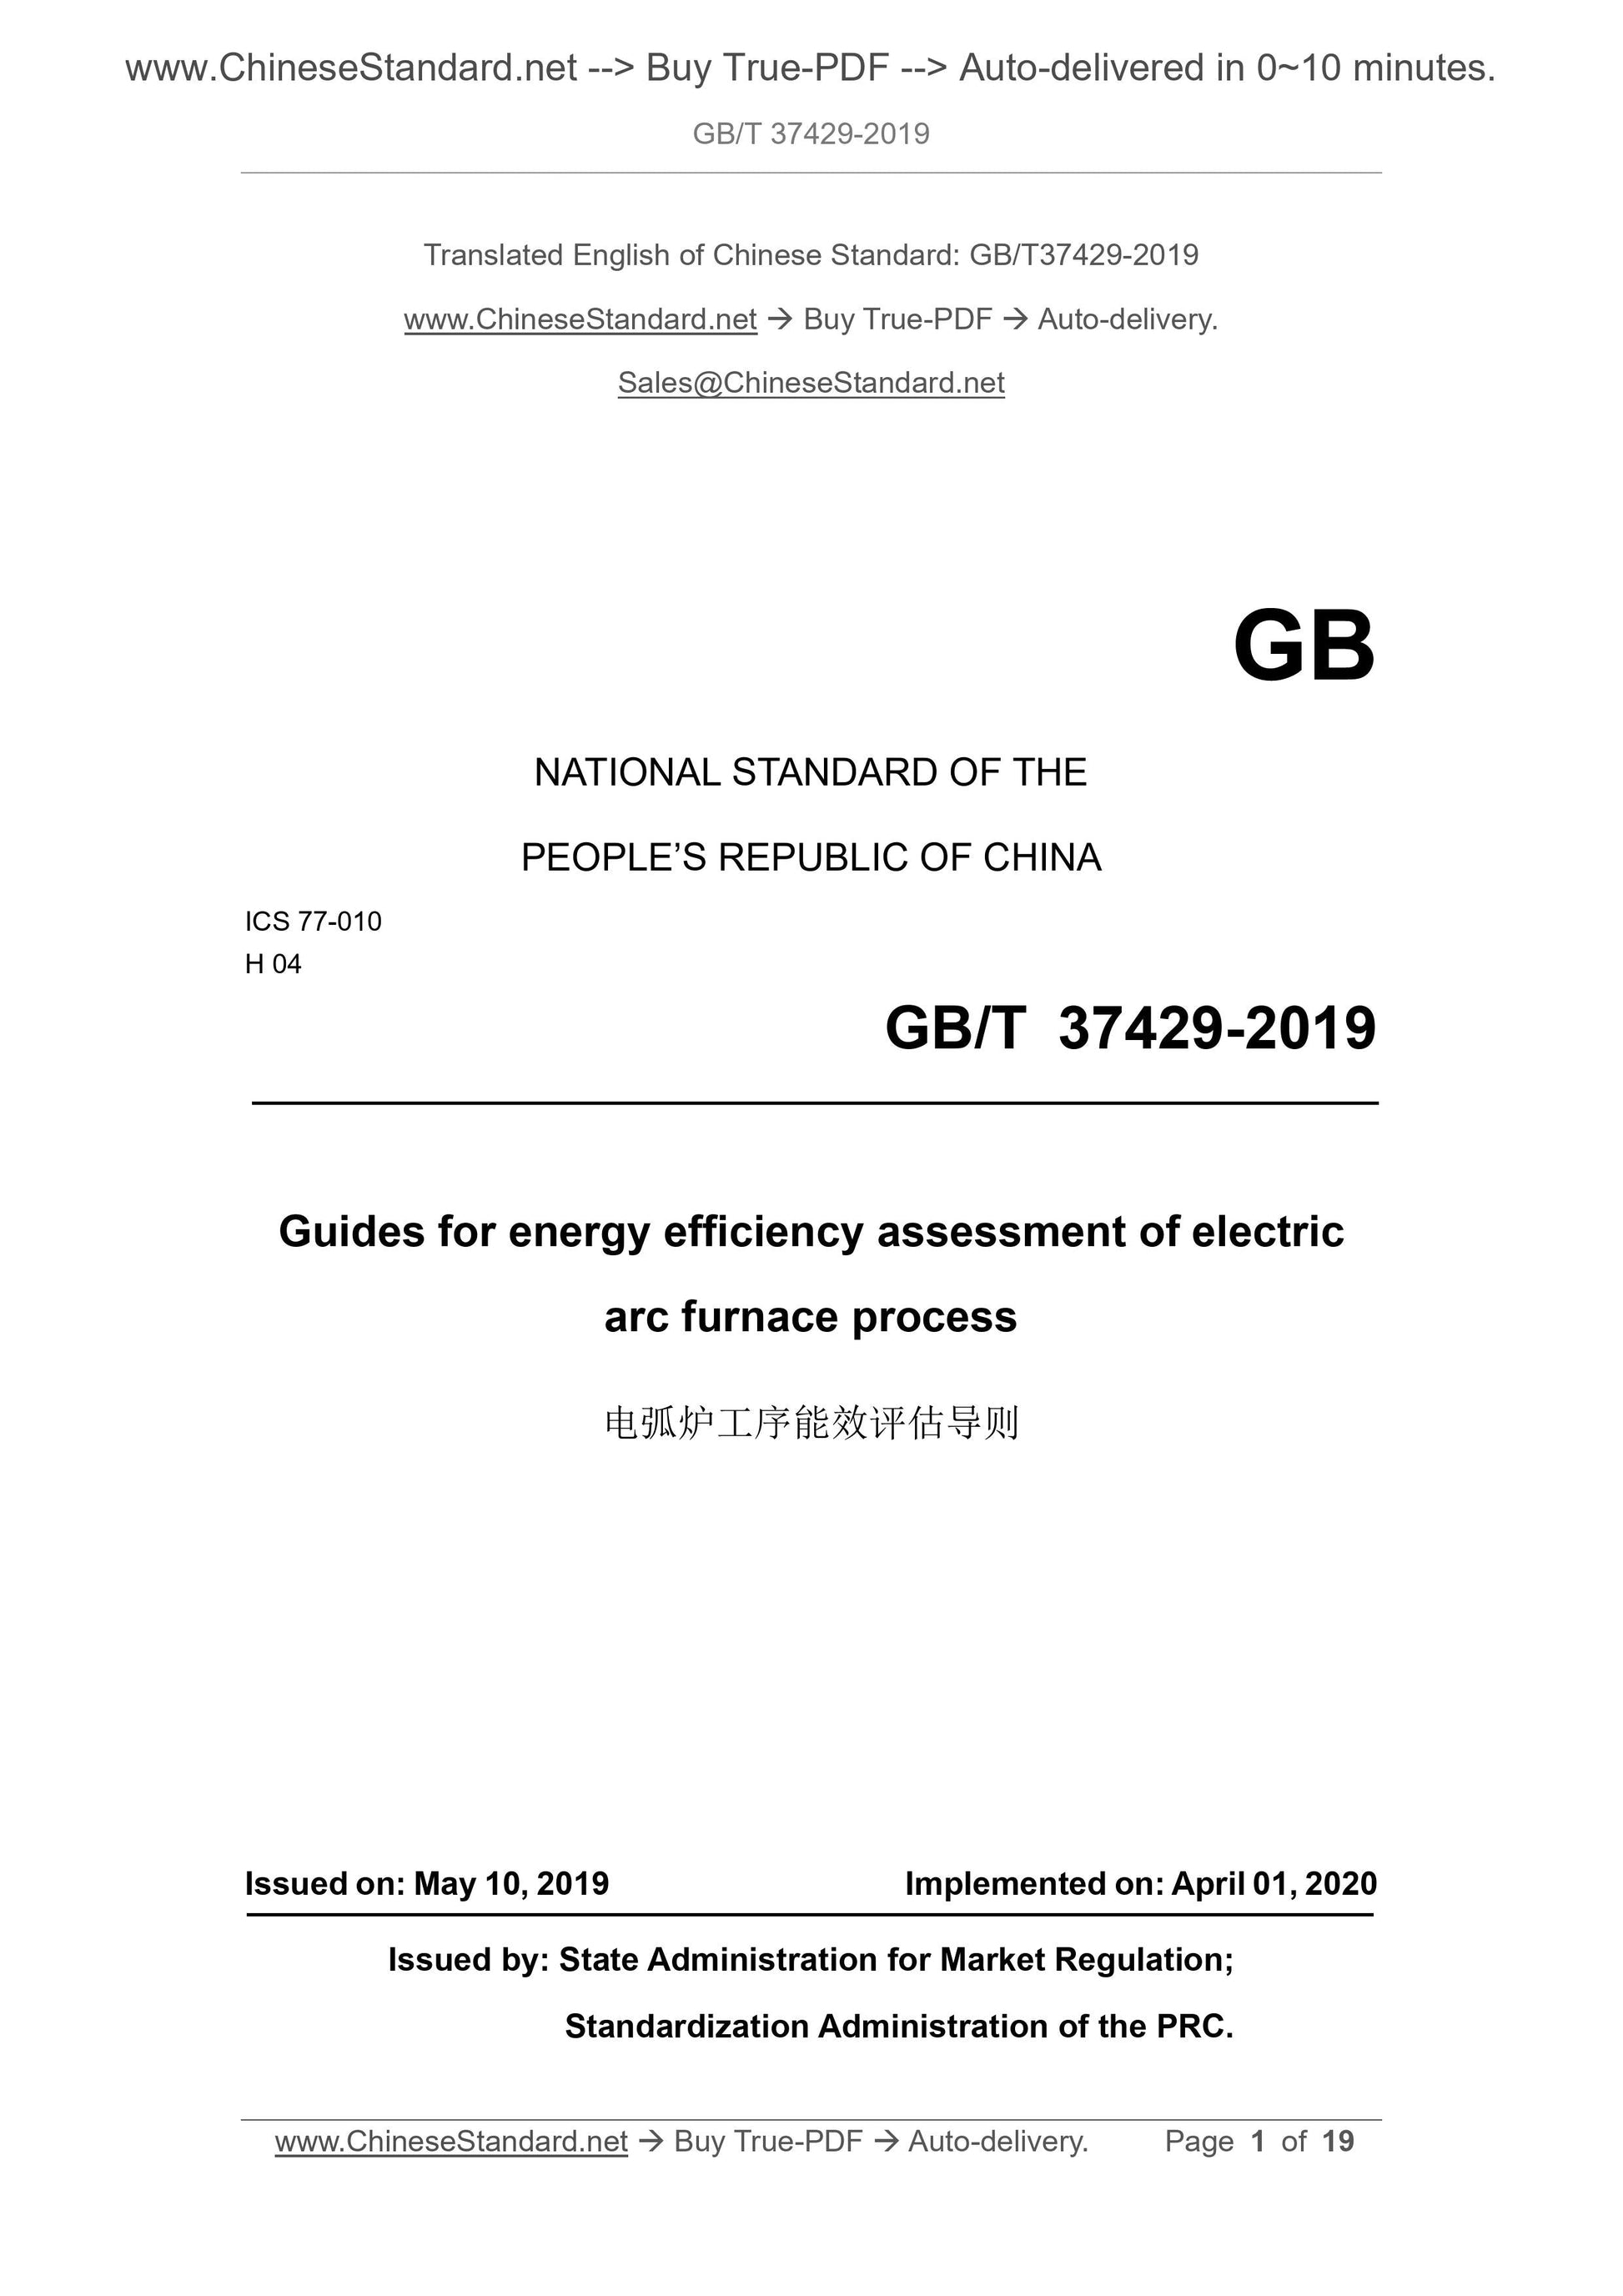 GB/T 37429-2019 Page 1